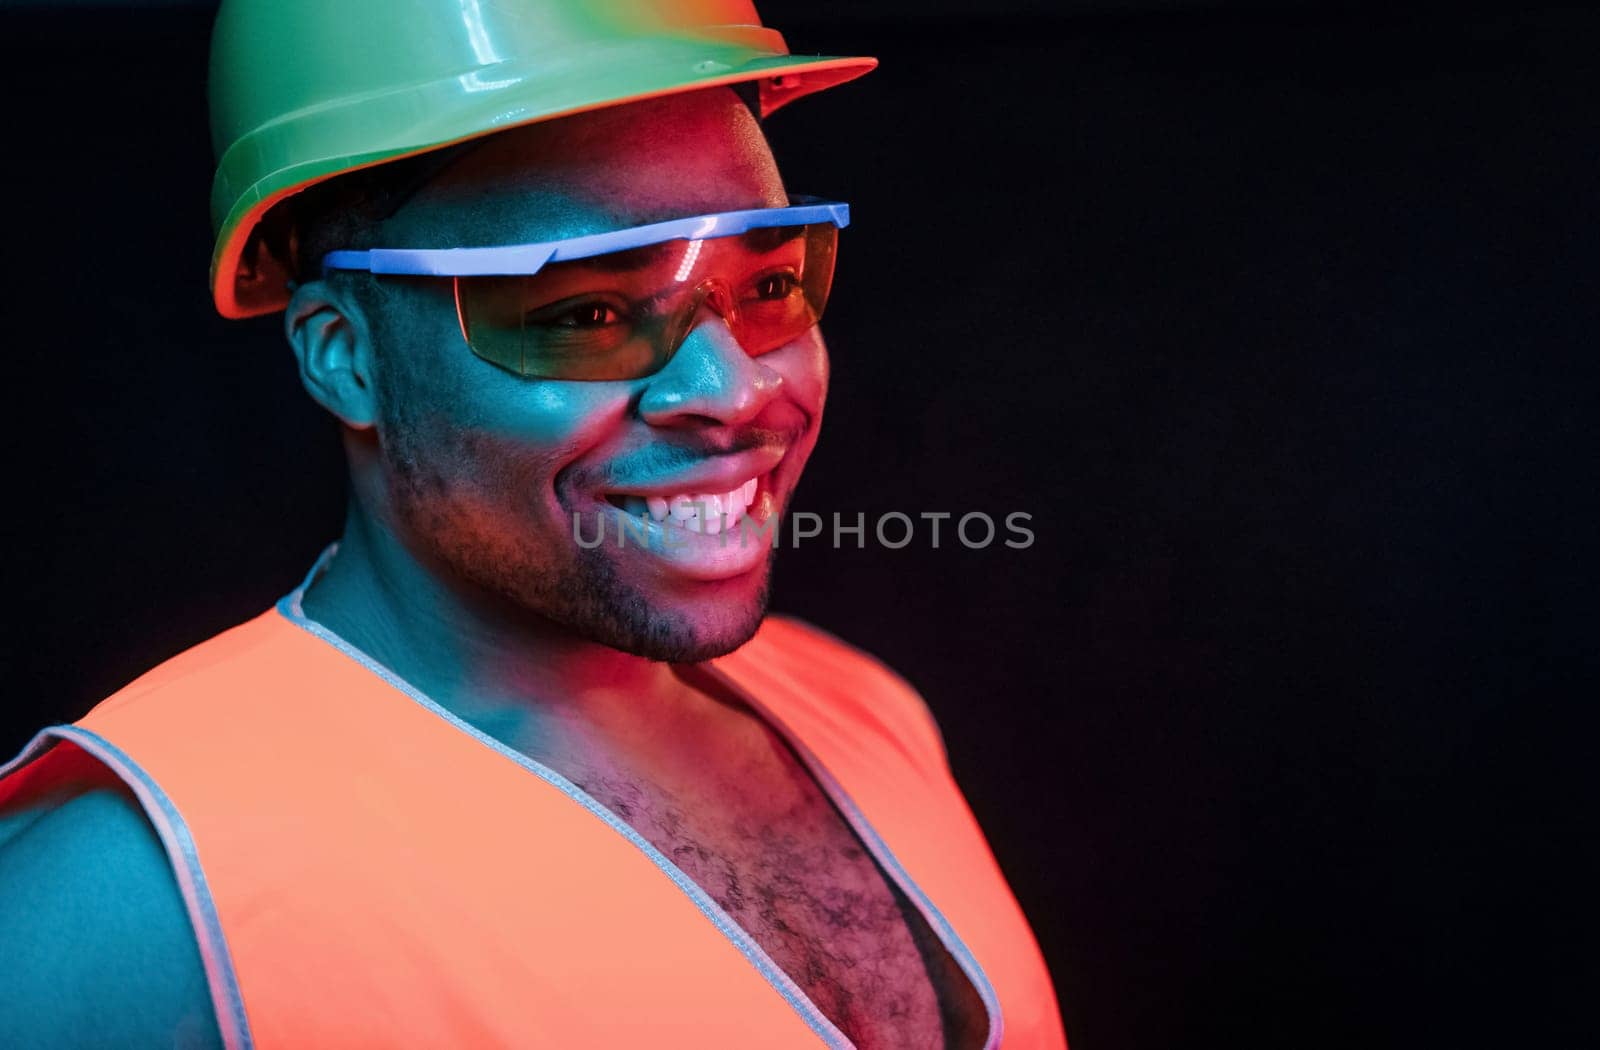 Construction worker in uniform and hard hat. Futuristic neon lighting. Young african american man in the studio.